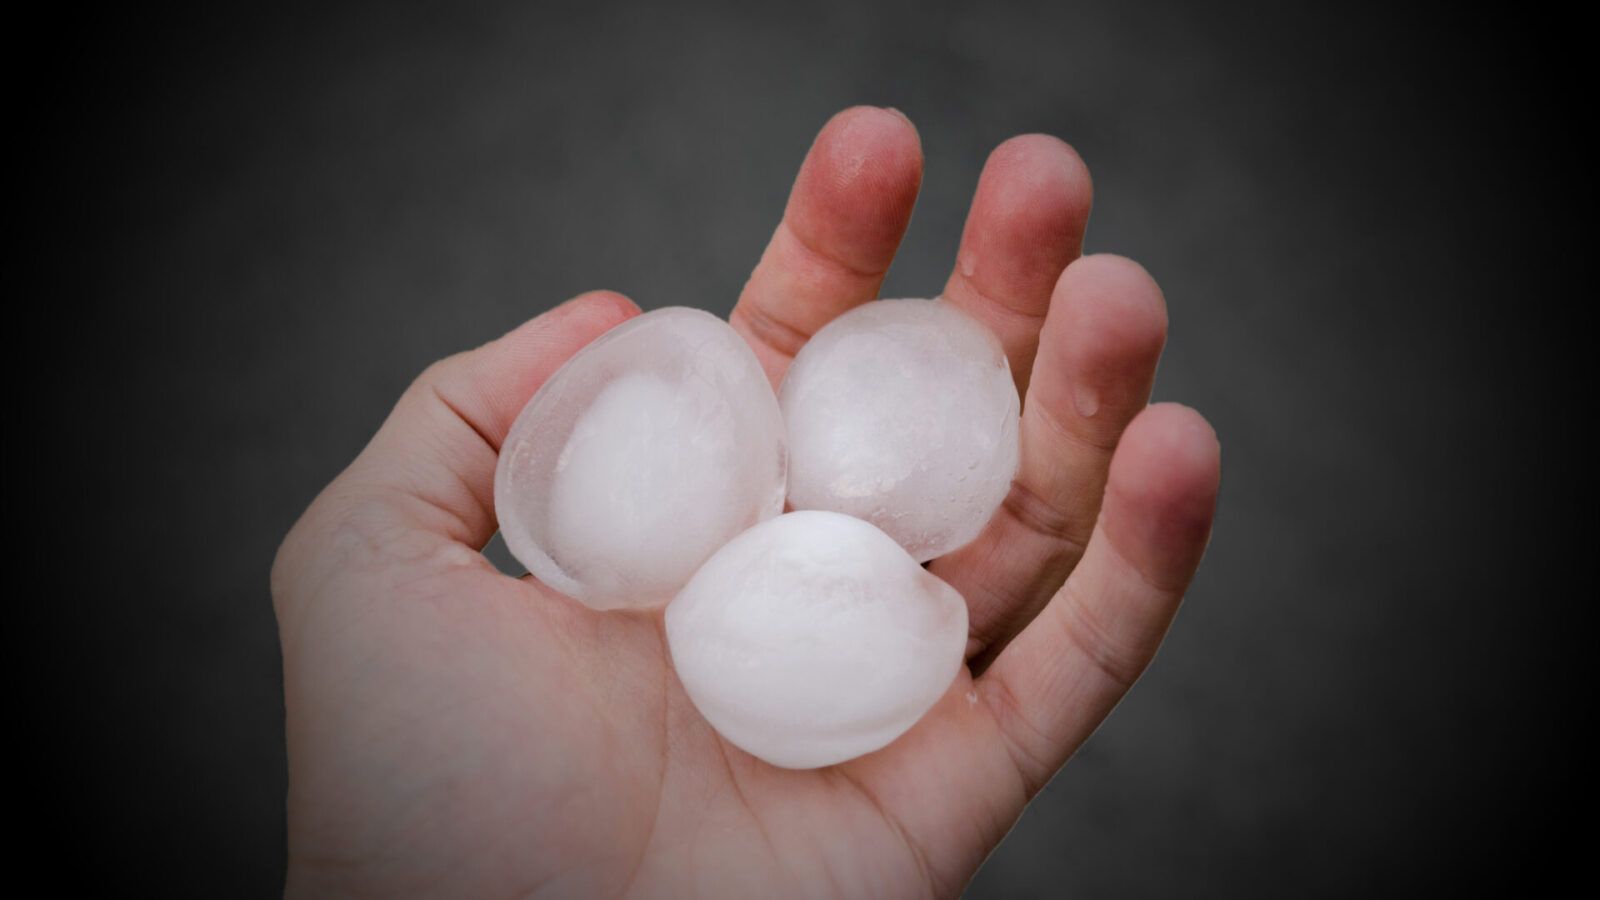 photo of three hailstones in a person's hand